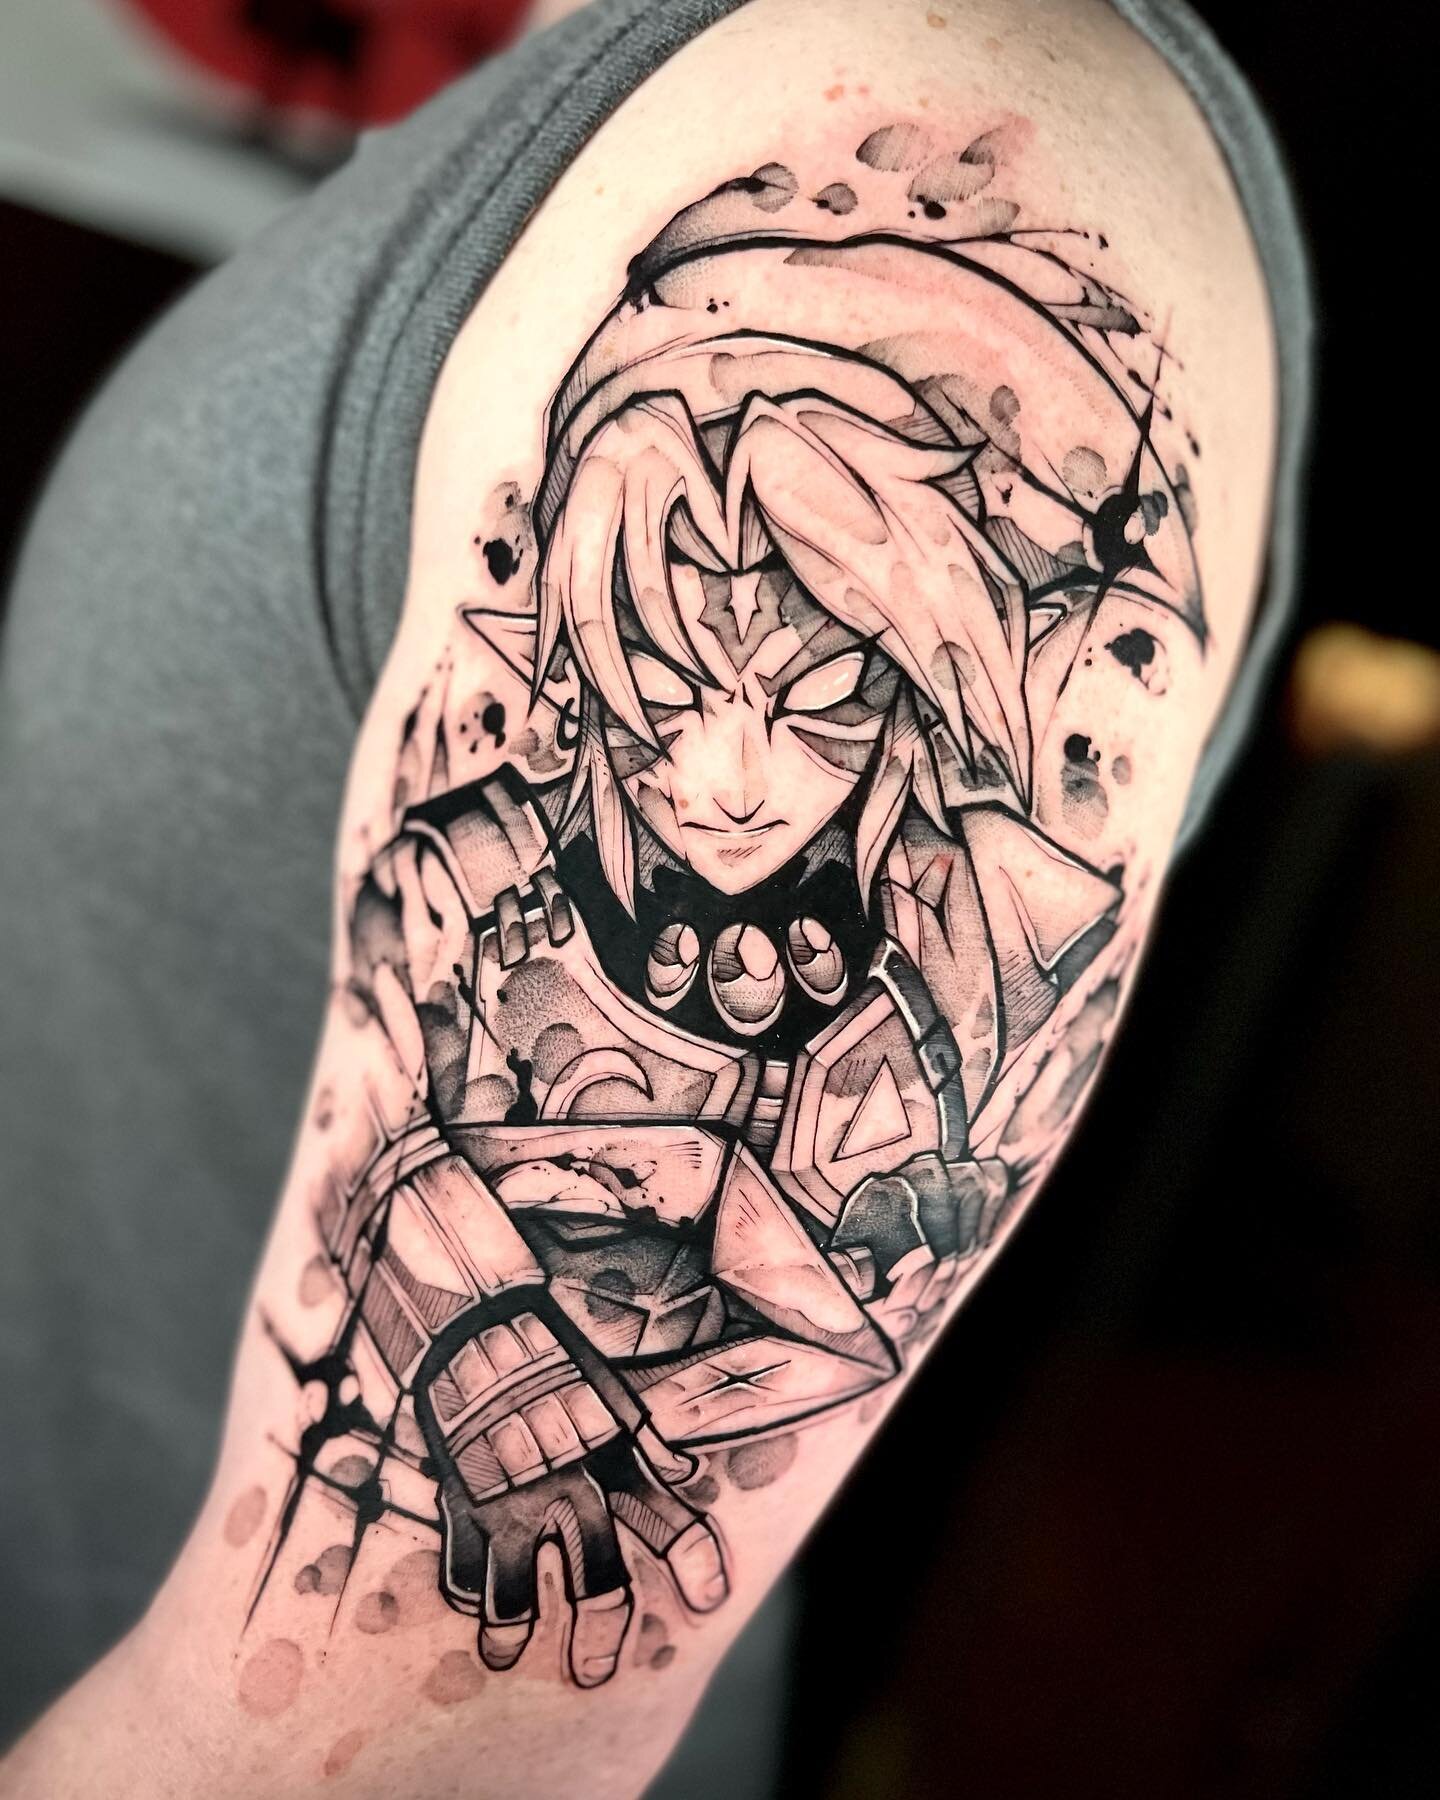 Fierce Deity Link from Majora&rsquo;s Mask!! This has to be the COOLEST thing from the Zelda games, you could only get from getting all the other masks. Thank you again @colonelkamo for being the coolest and sitting like an absolute champion
.
.
I li